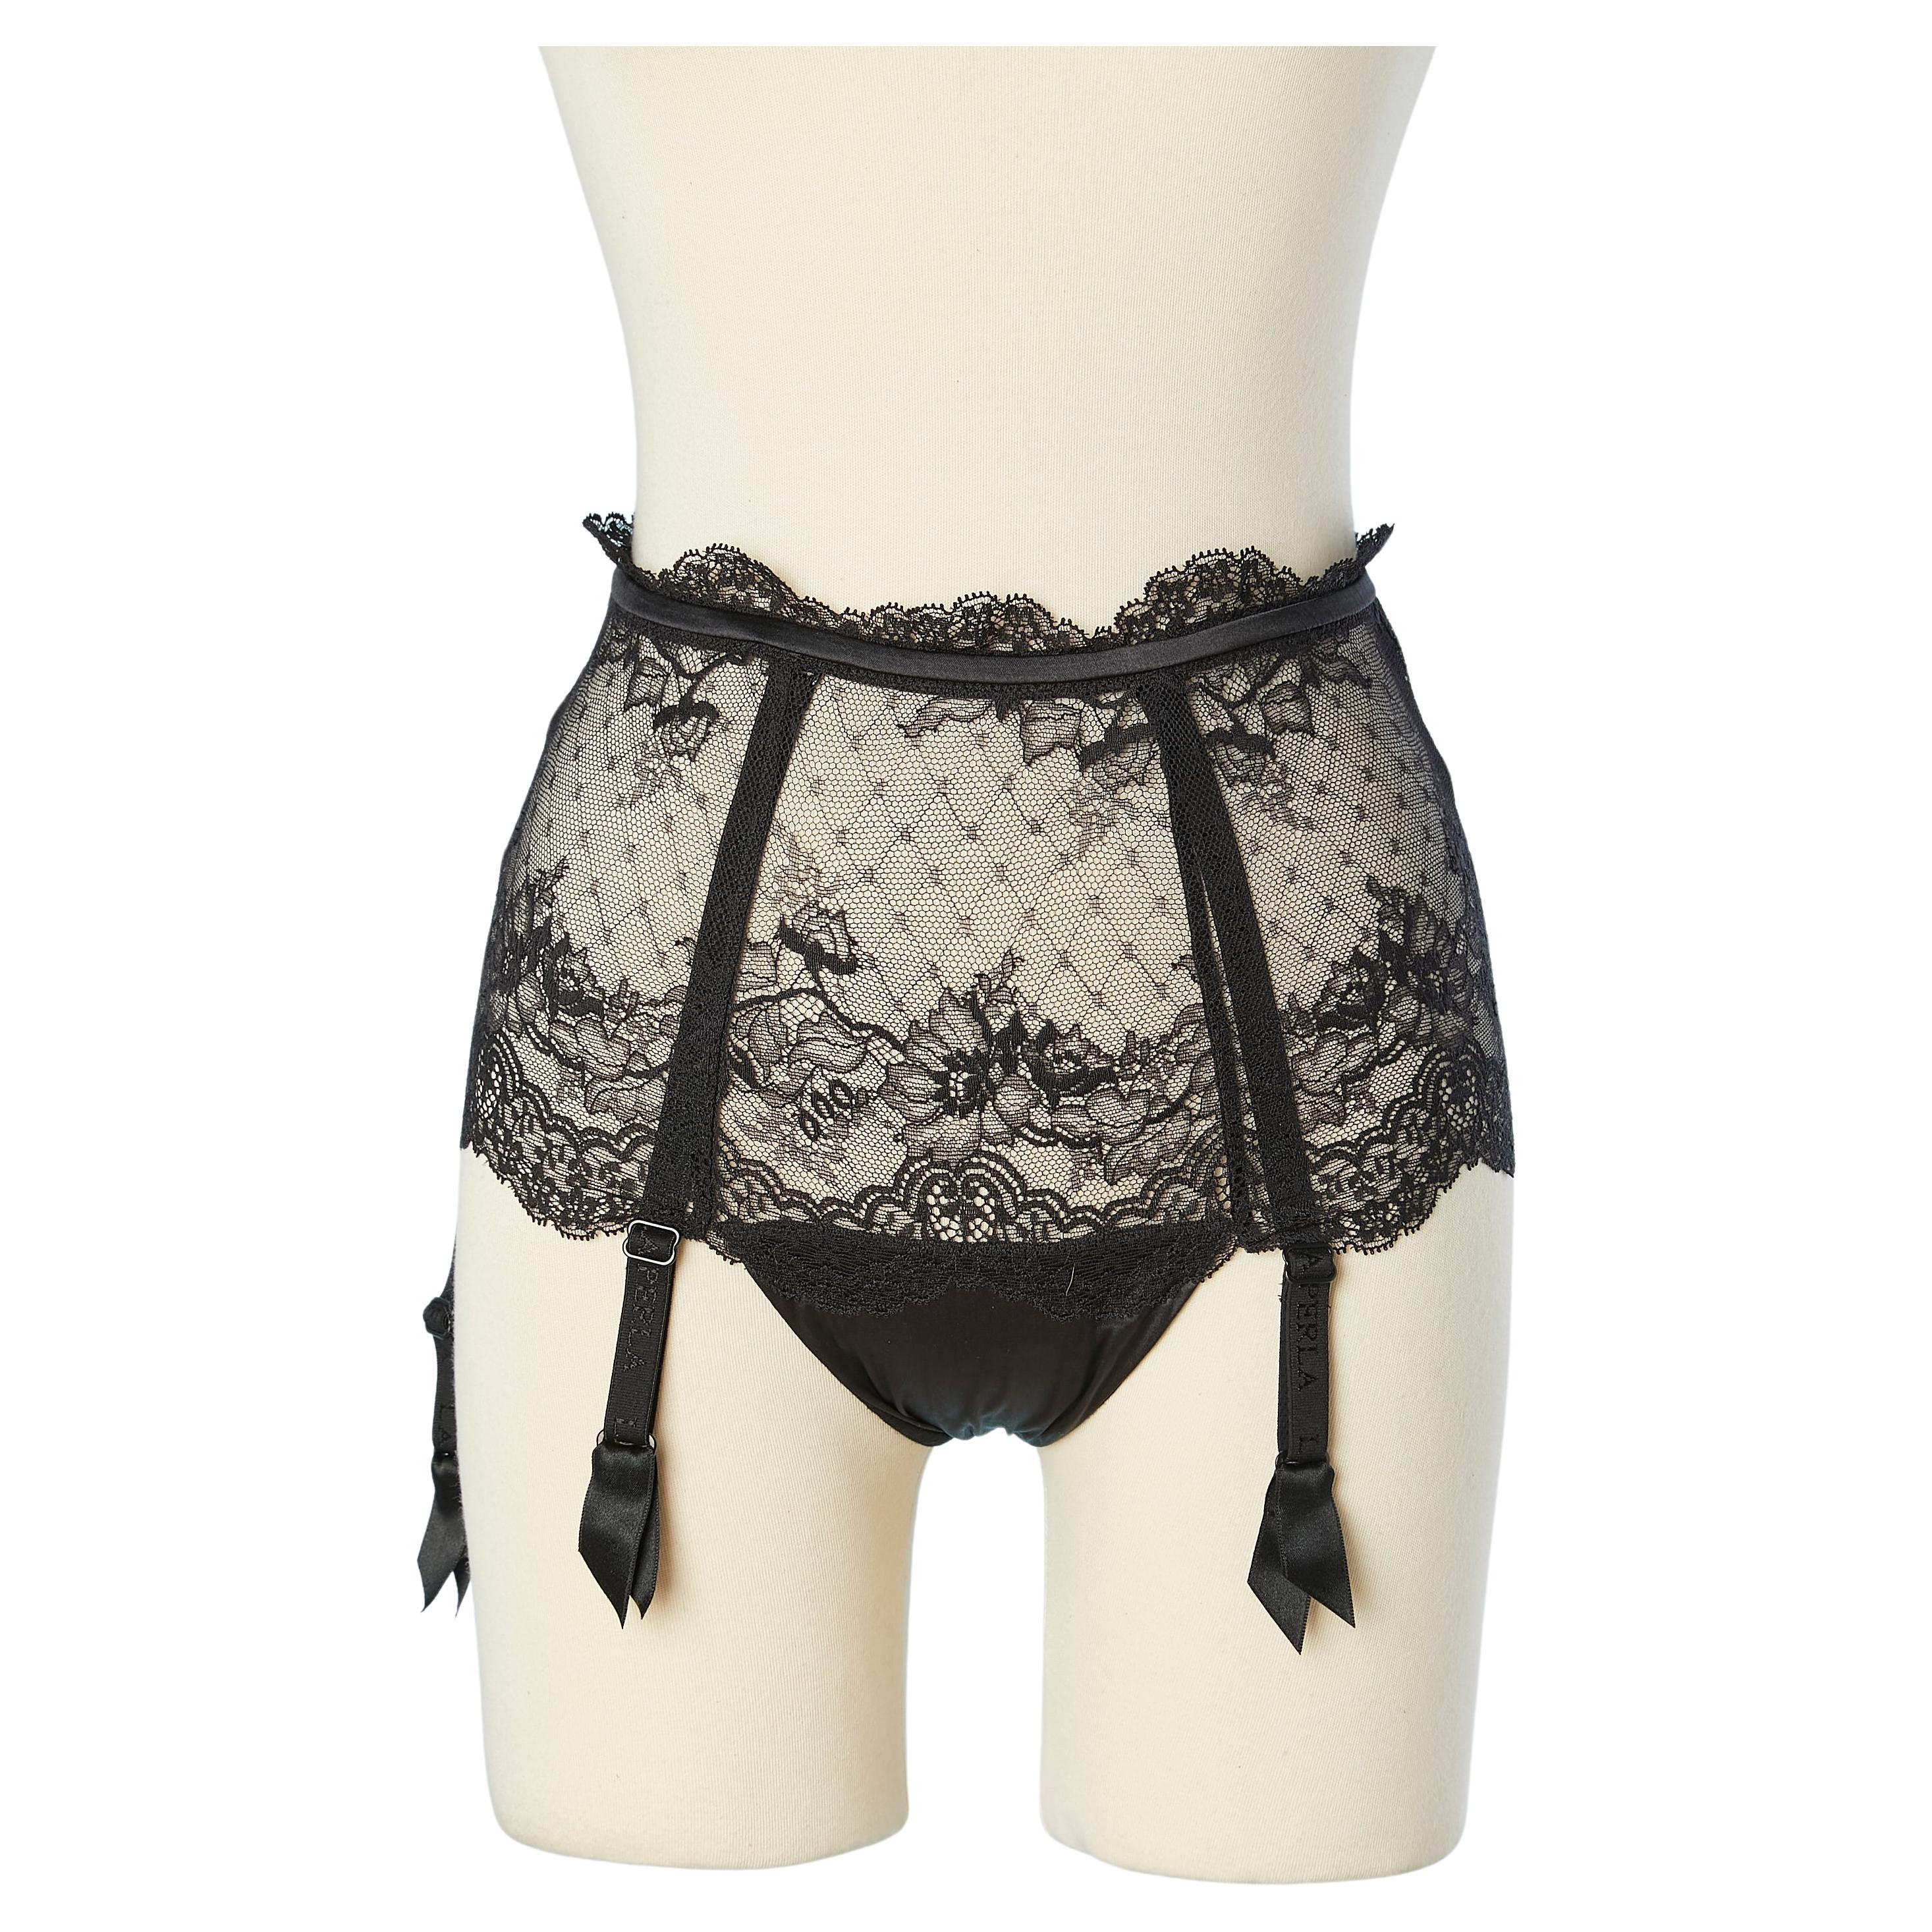 Black lace panties with garter belt and laces in the back La Perla  For Sale